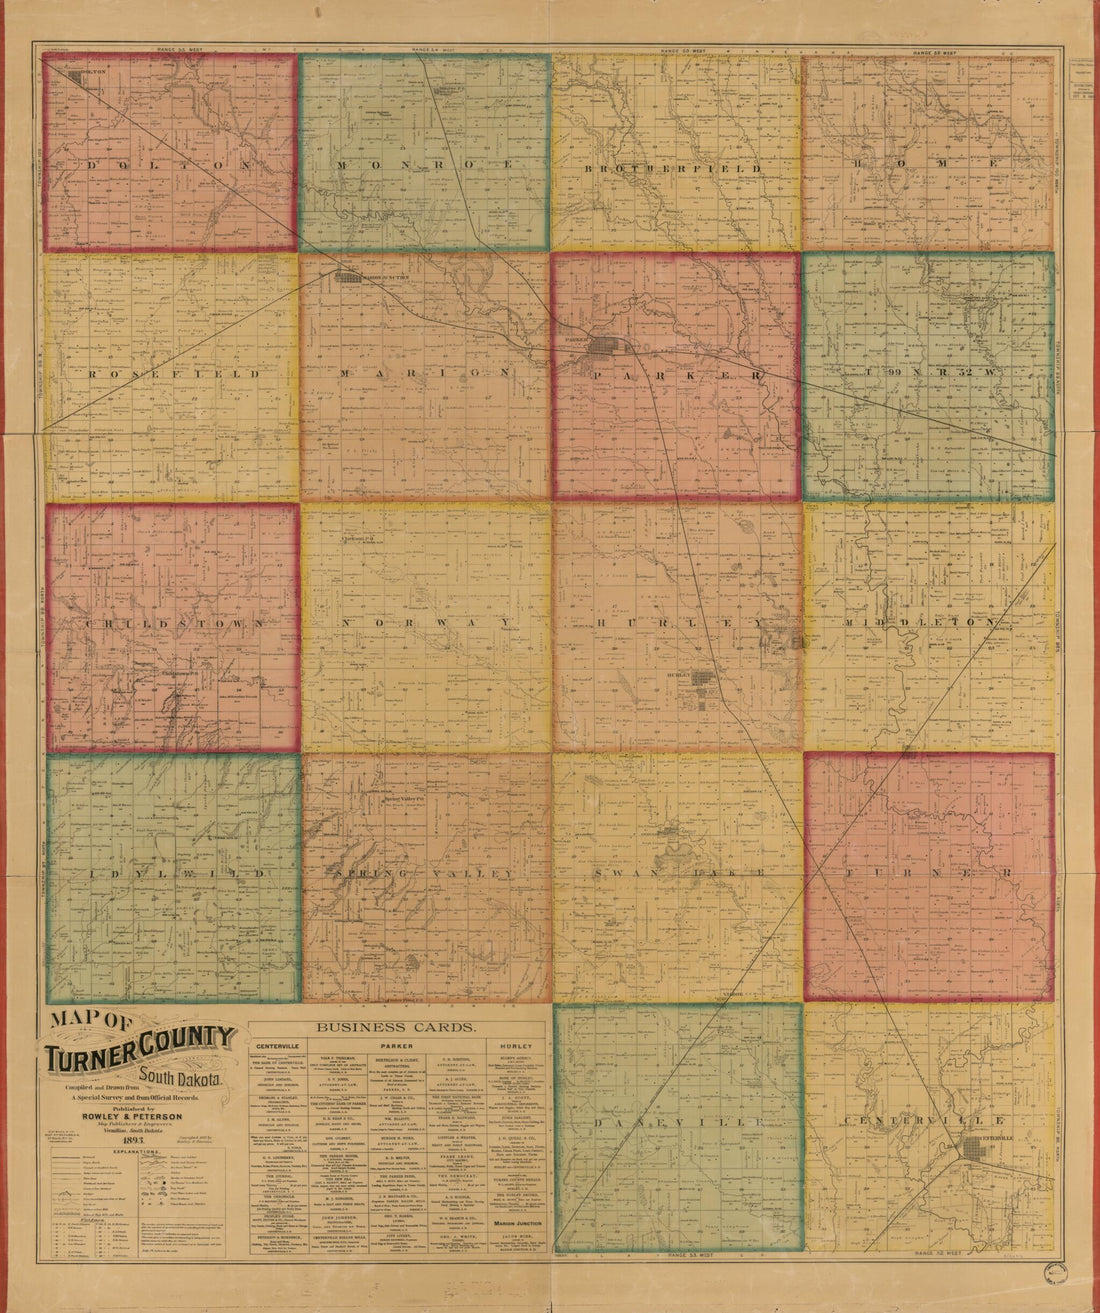 This old map of Map of Turner County, South Dakota : Compiled and Drawn from a Special Survey and from Official Records from 1893 was created by  E.P. Noll &amp; Co,  Rowley &amp; Peterson in 1893